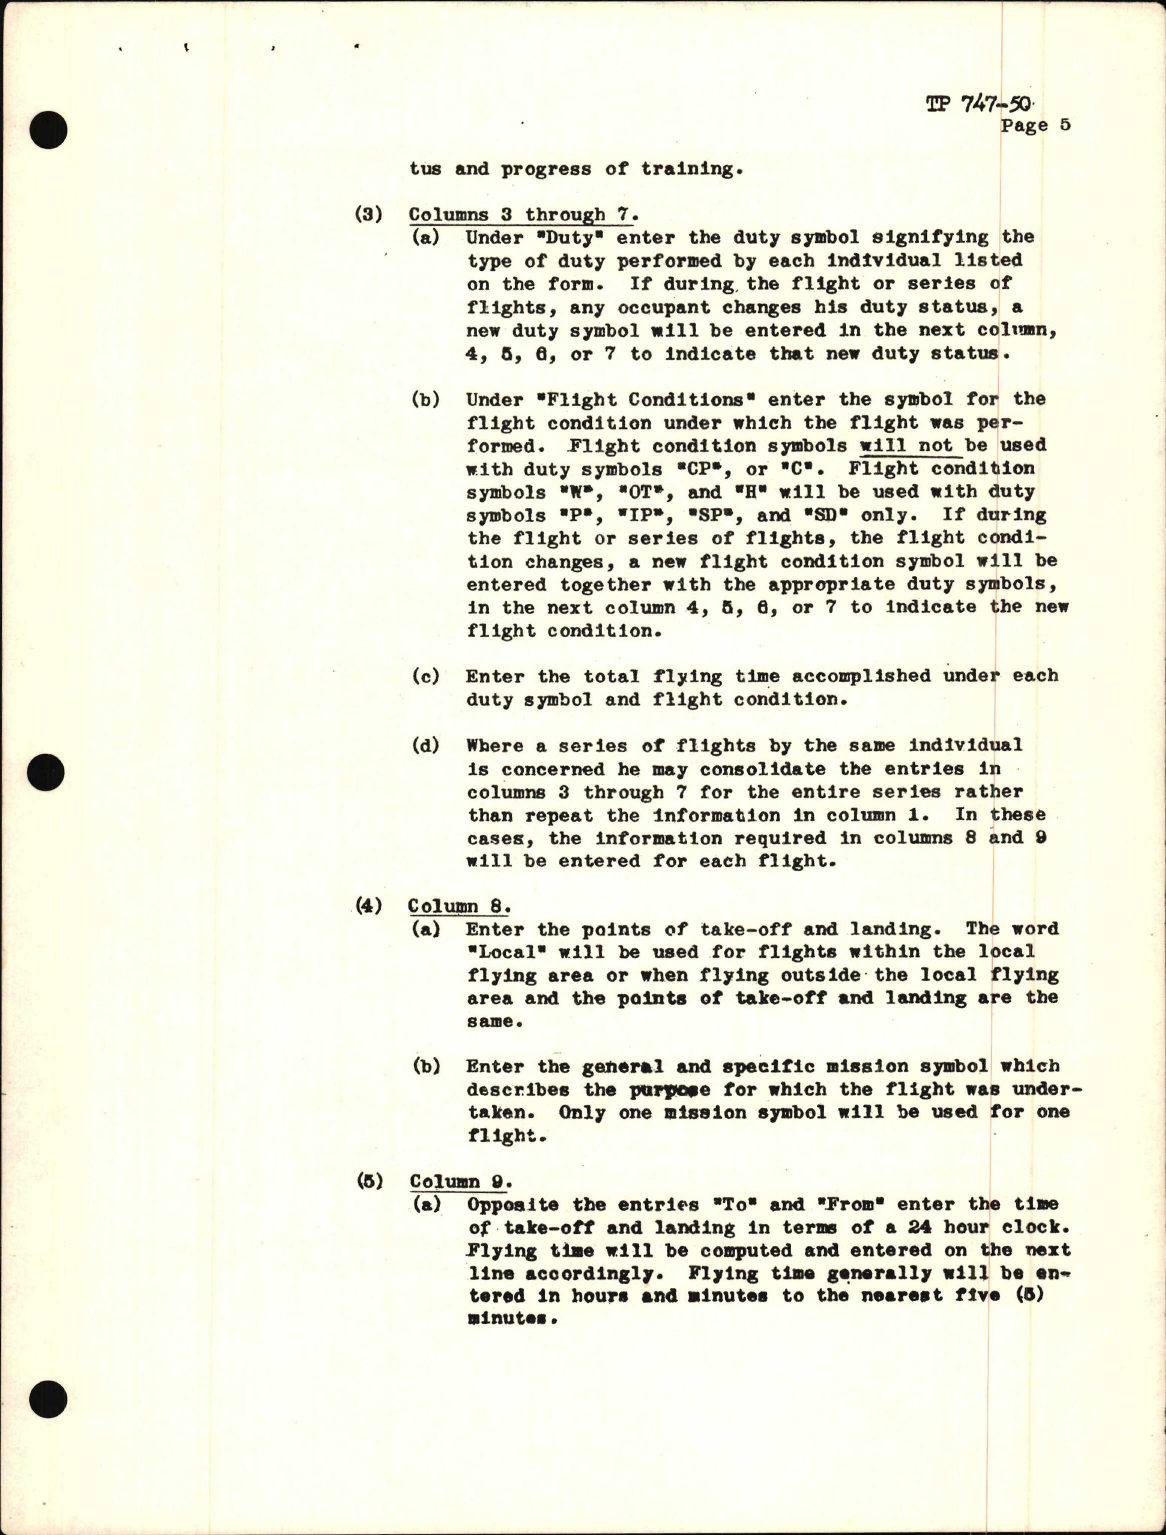 Sample page 5 from AirCorps Library document: Training Project, USAF Maintenance Systems and Forms